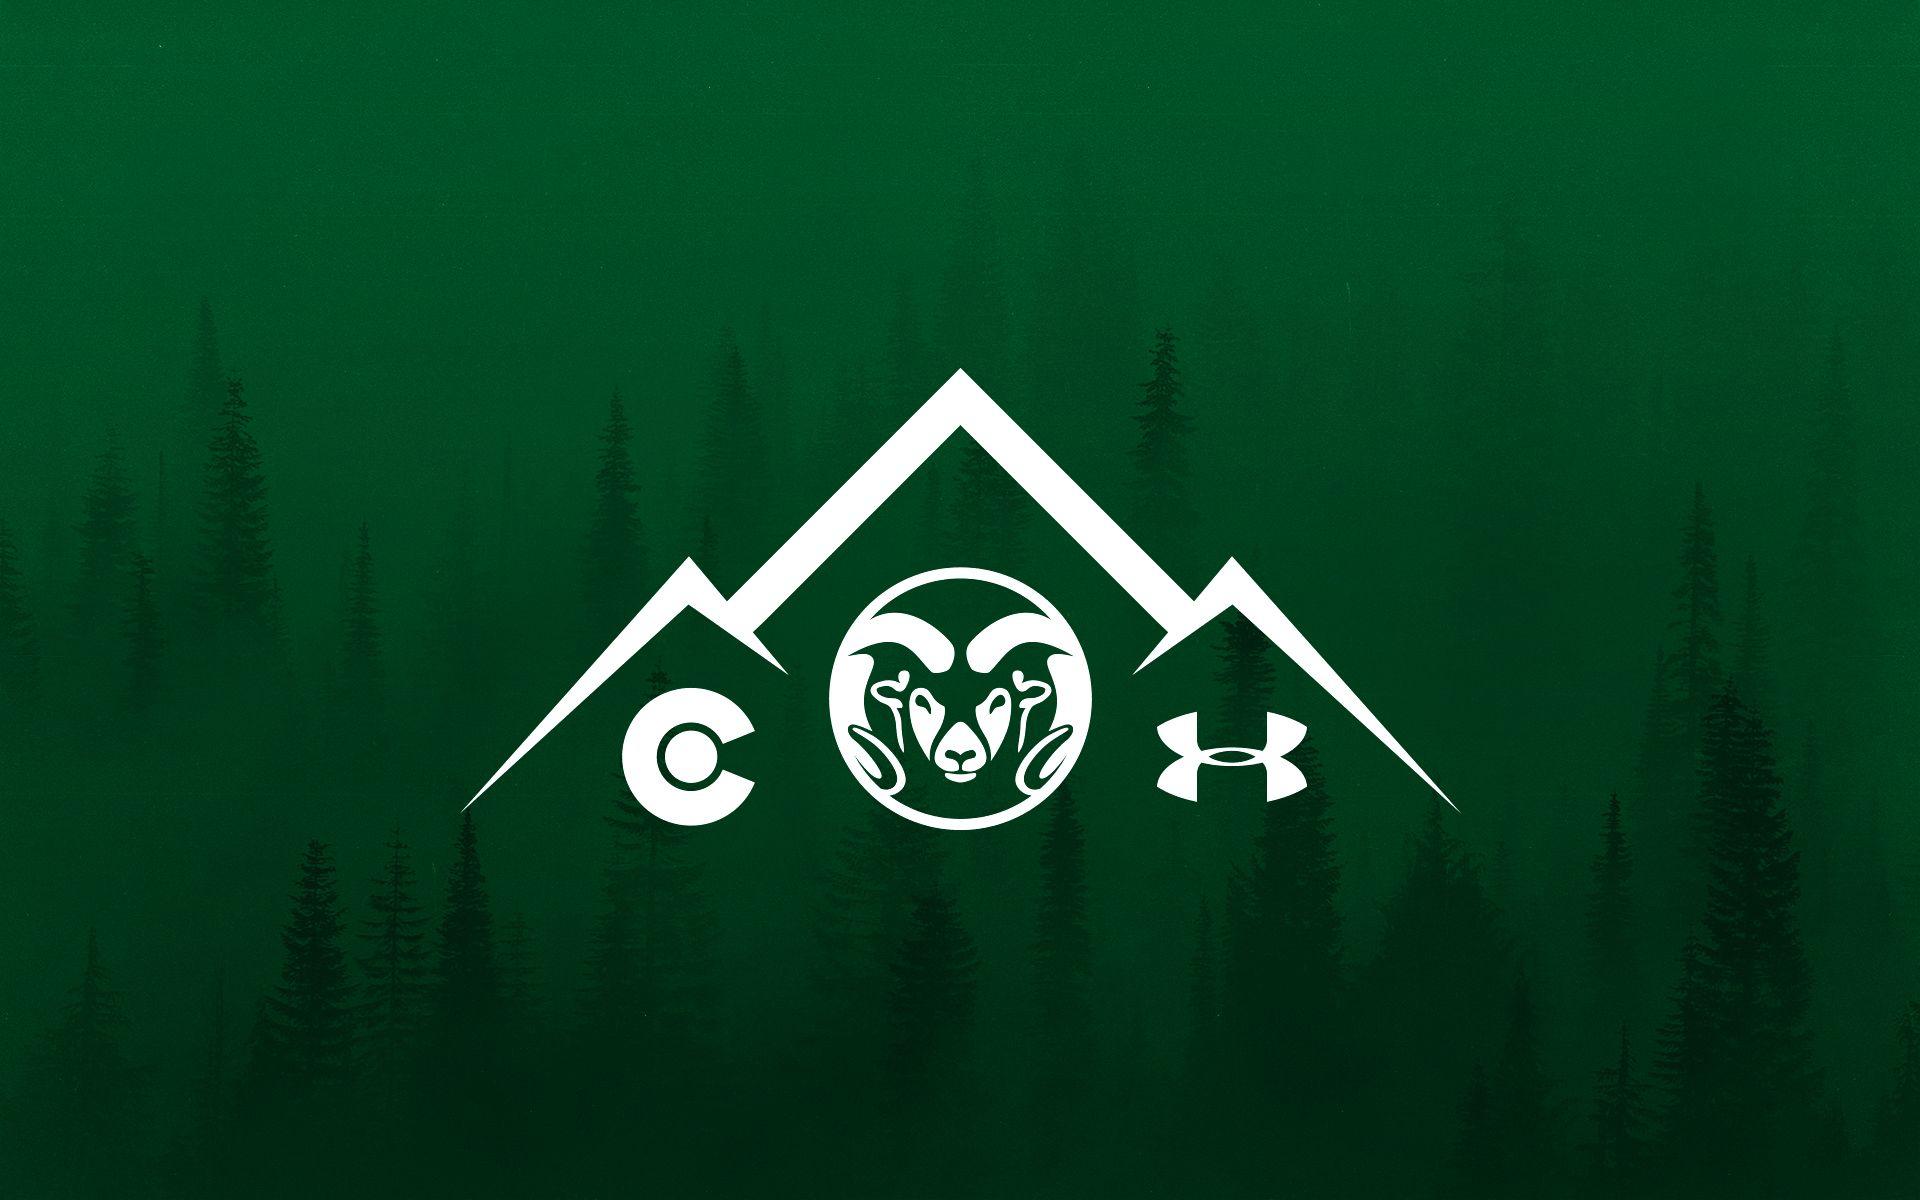 Green and Gold Ram Logo - Rams Creative Wallpapers - Colorado State University Athletics